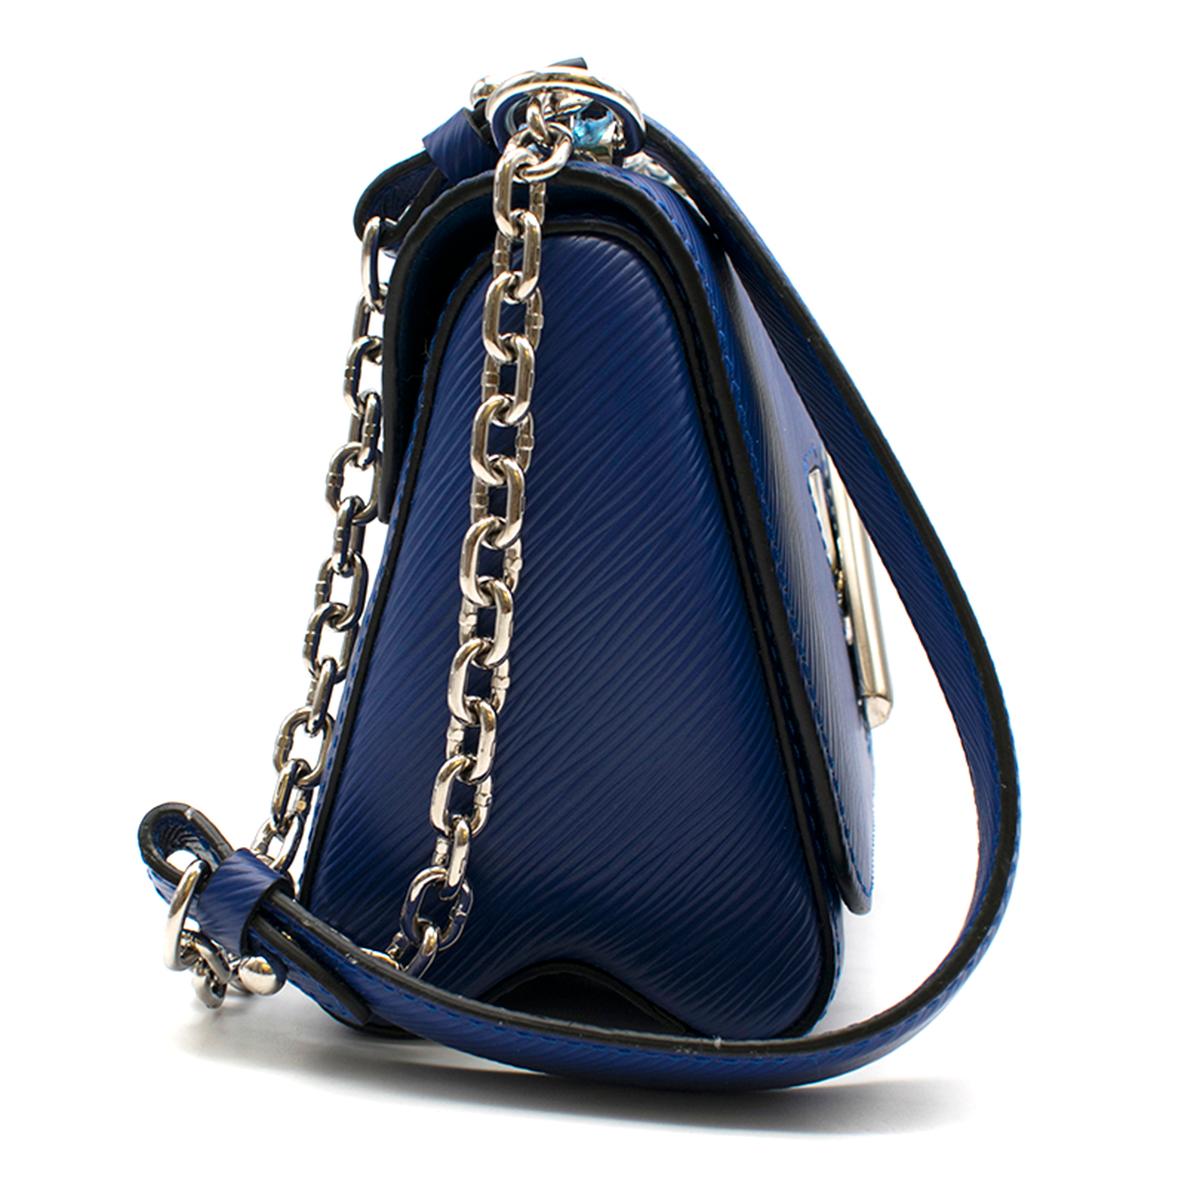 Louis Vuitton Blue Twist PM  Epi Leather Mini Shoulder Bag

- Blue, leather shoulder bag
- Silver-tone hardware
- Iconic LV twist lock
- Suede lining 
-  Chain shoulder strap with leather pad
- Inside flat pocket with removable mirror
- Large inside